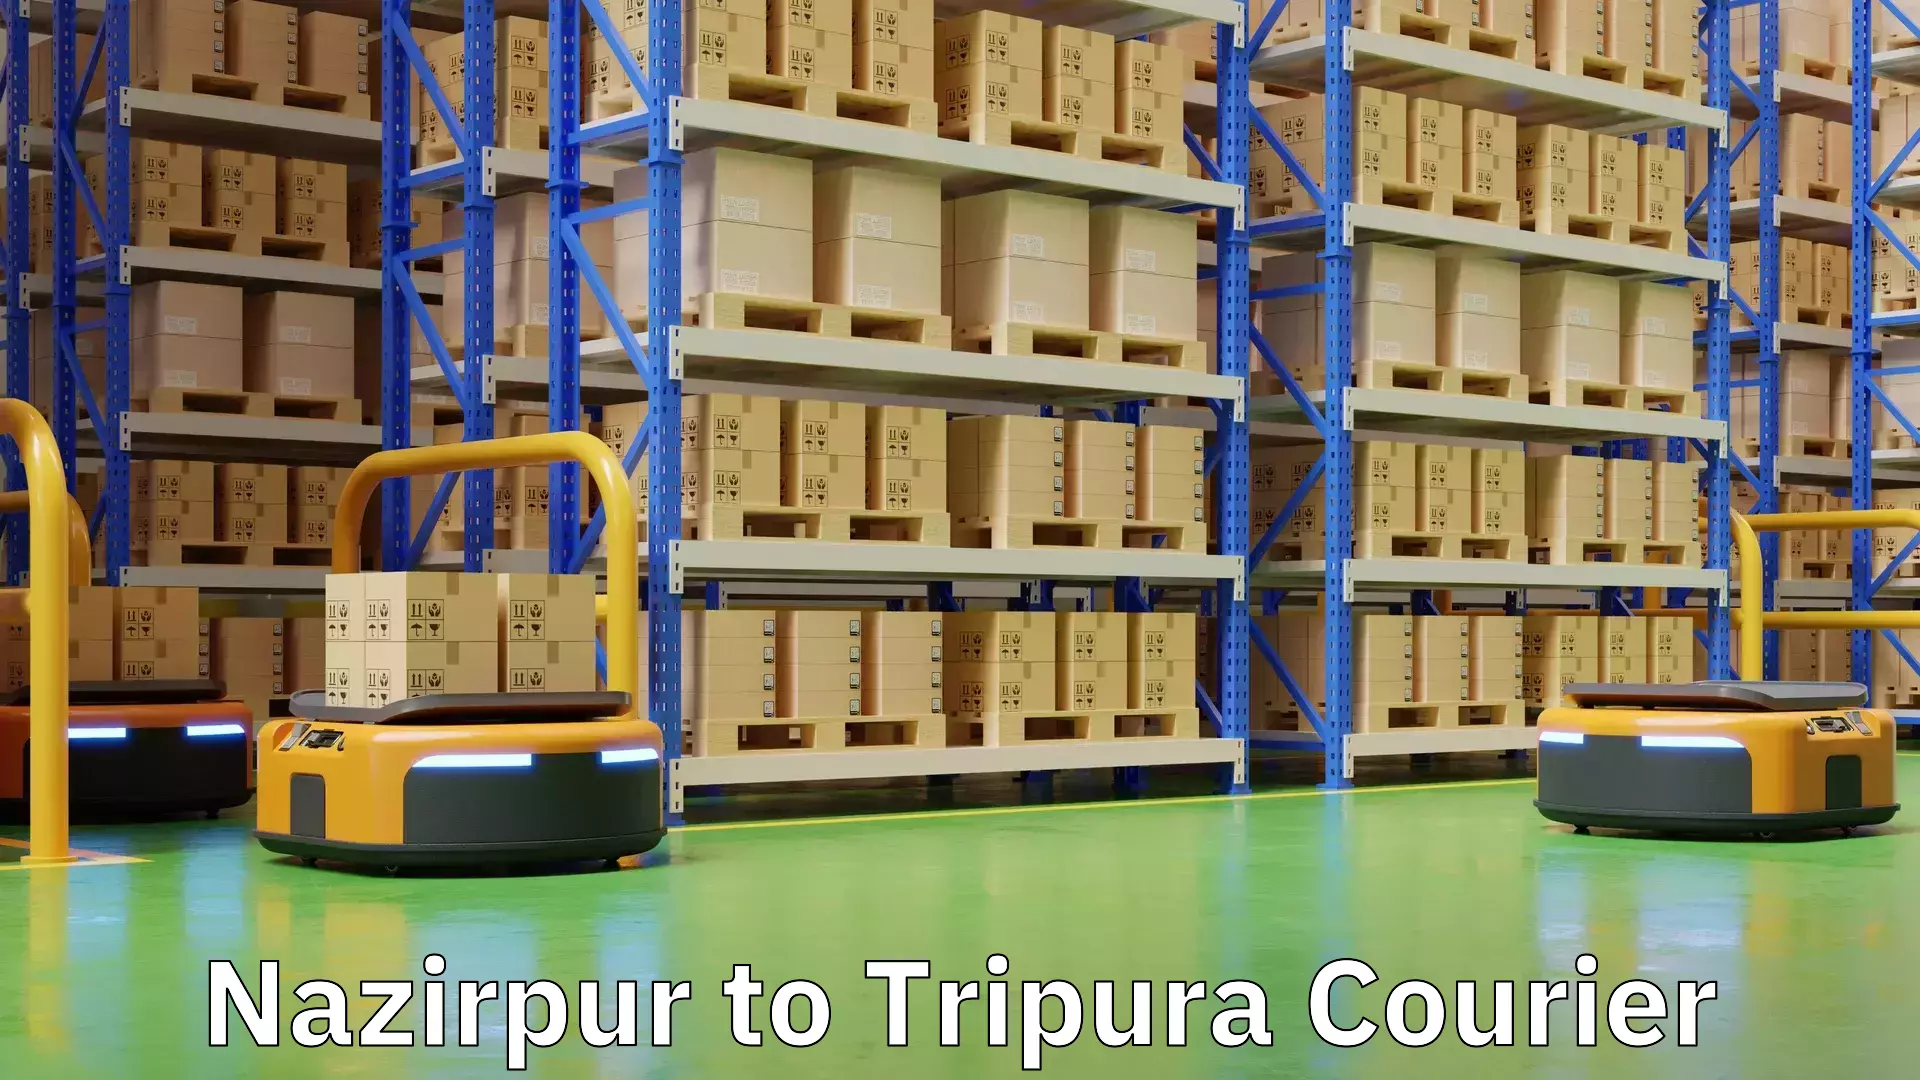 Cash on delivery service Nazirpur to Tripura